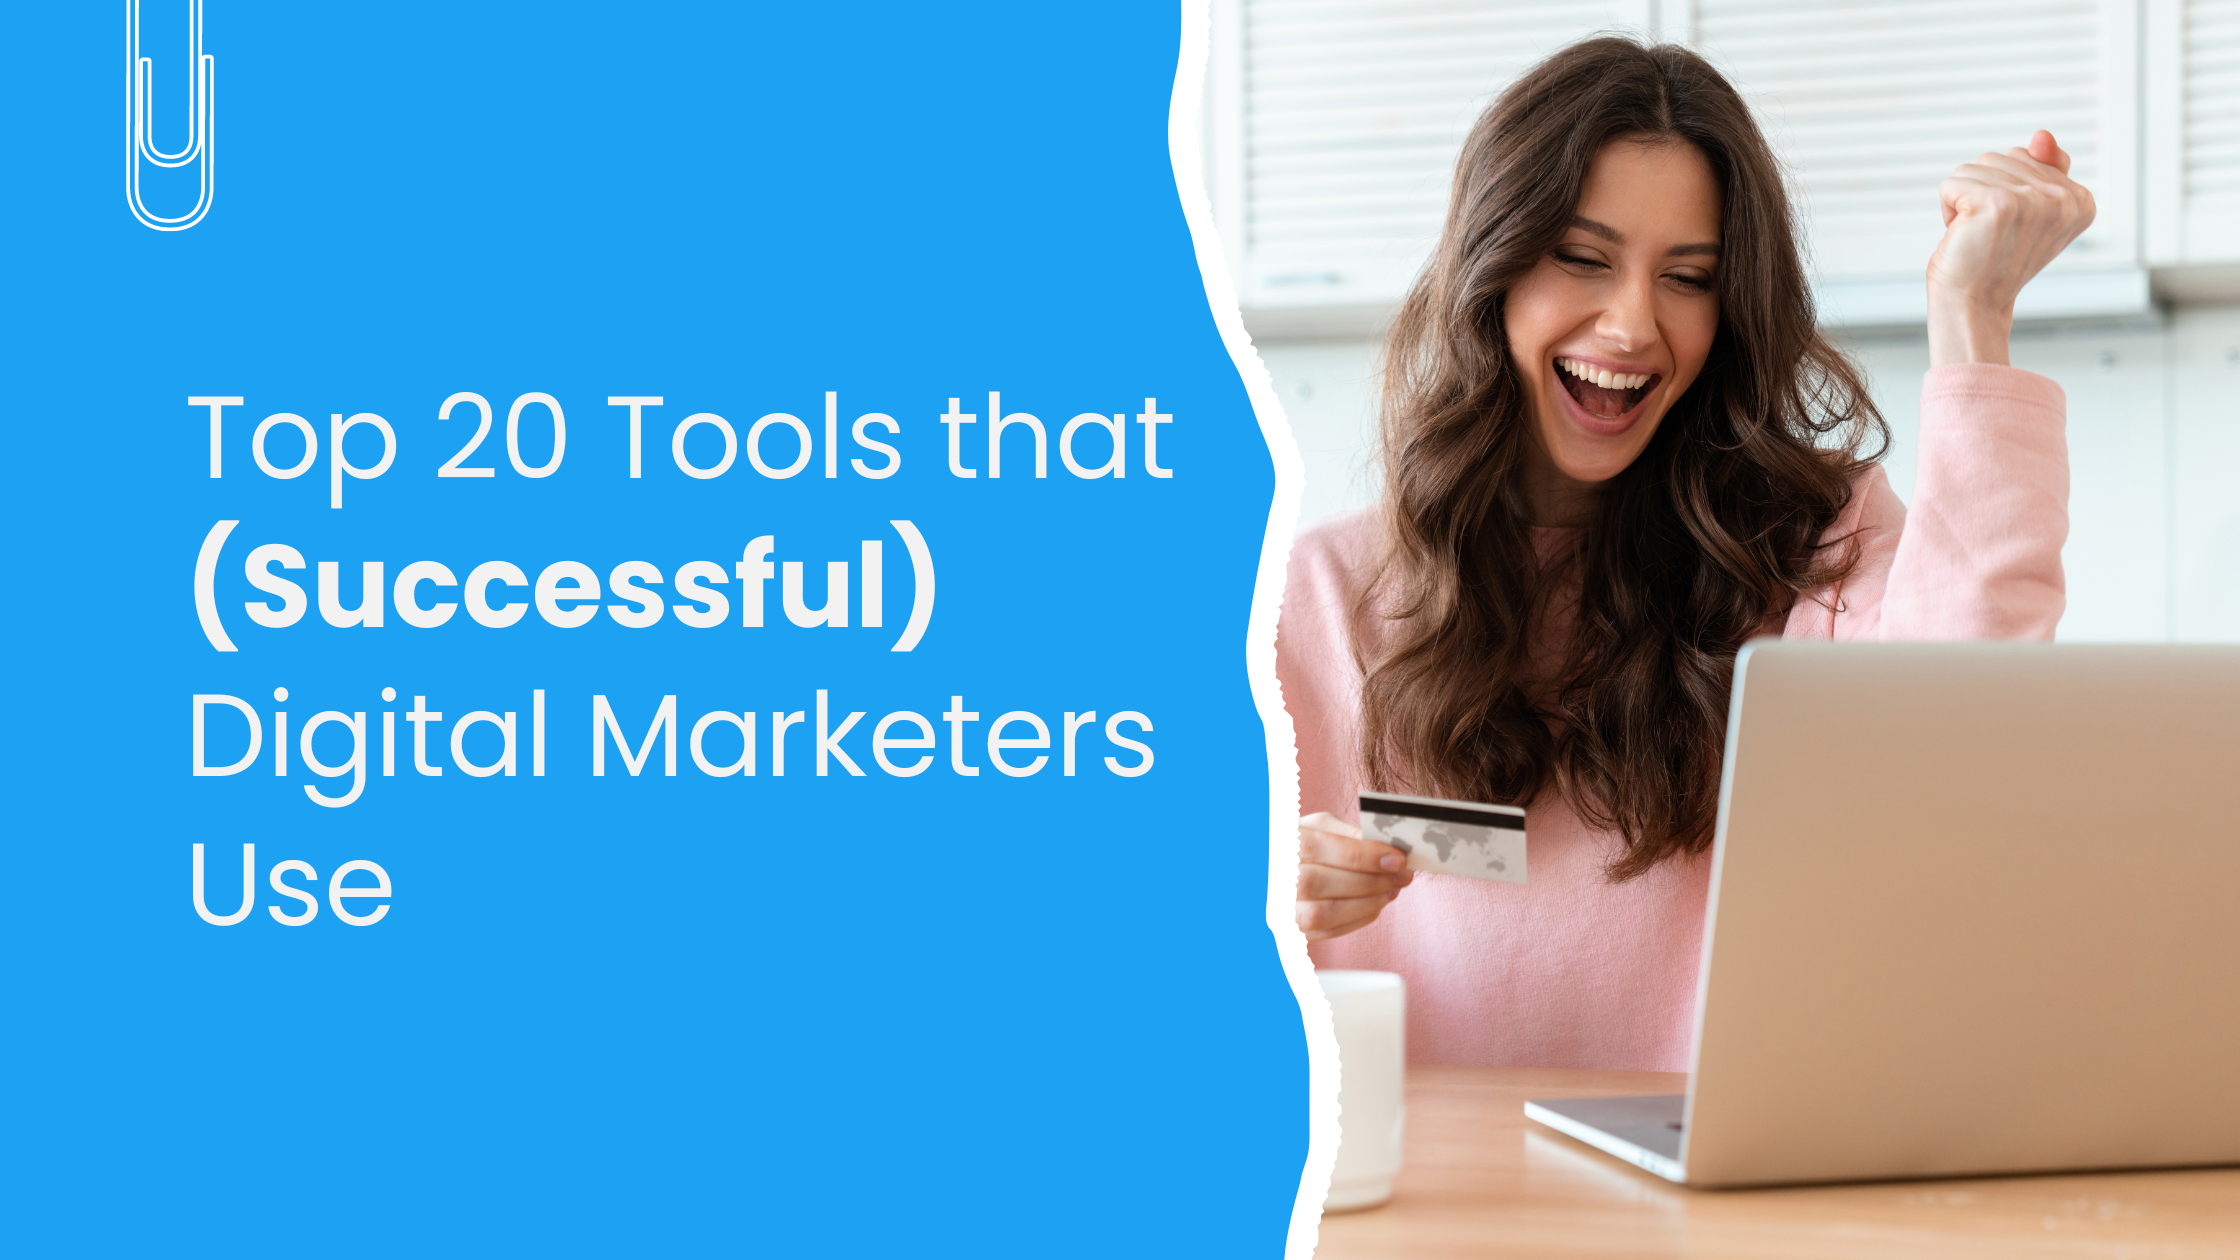 Digital Marketing tools list with reviews